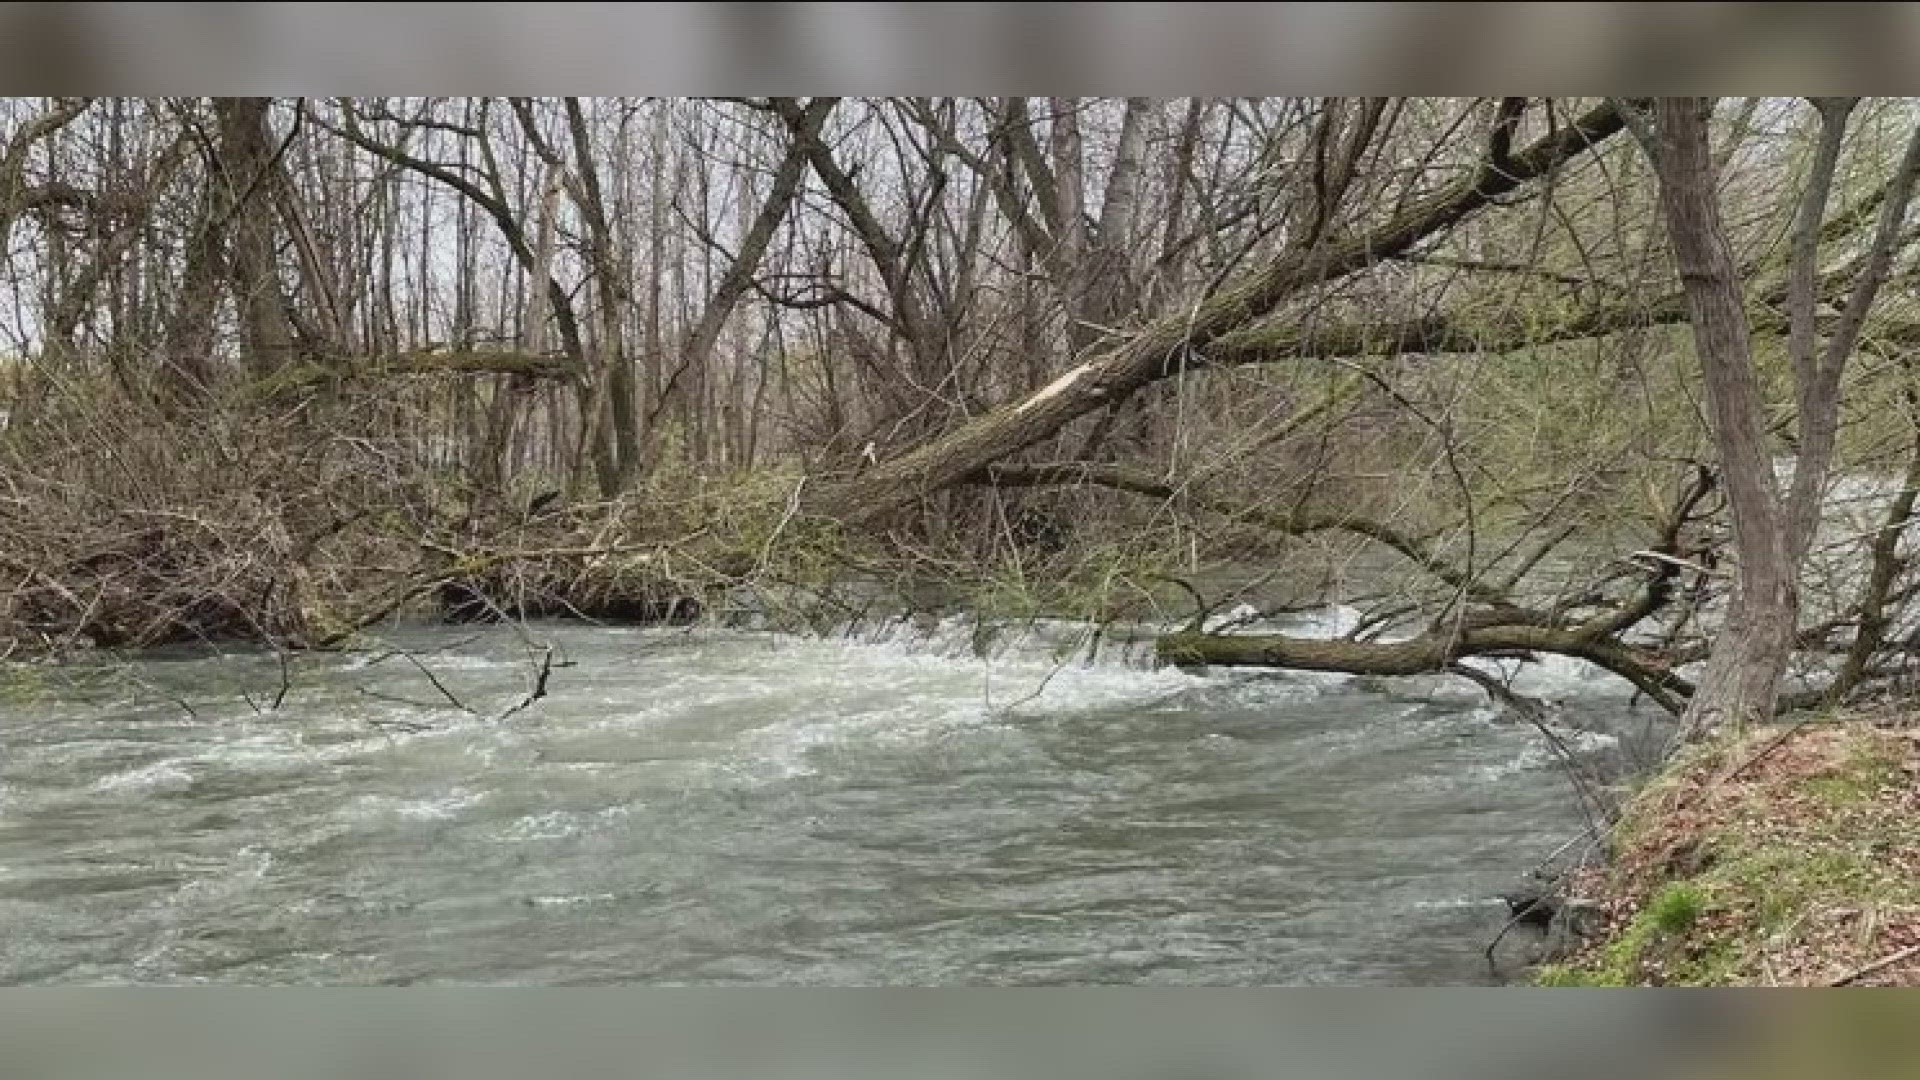 You're allowed to float parts of the Boise River outside of the 6-mile stretch between Barber Park and Ann Morrison park, but those areas have more hazards.